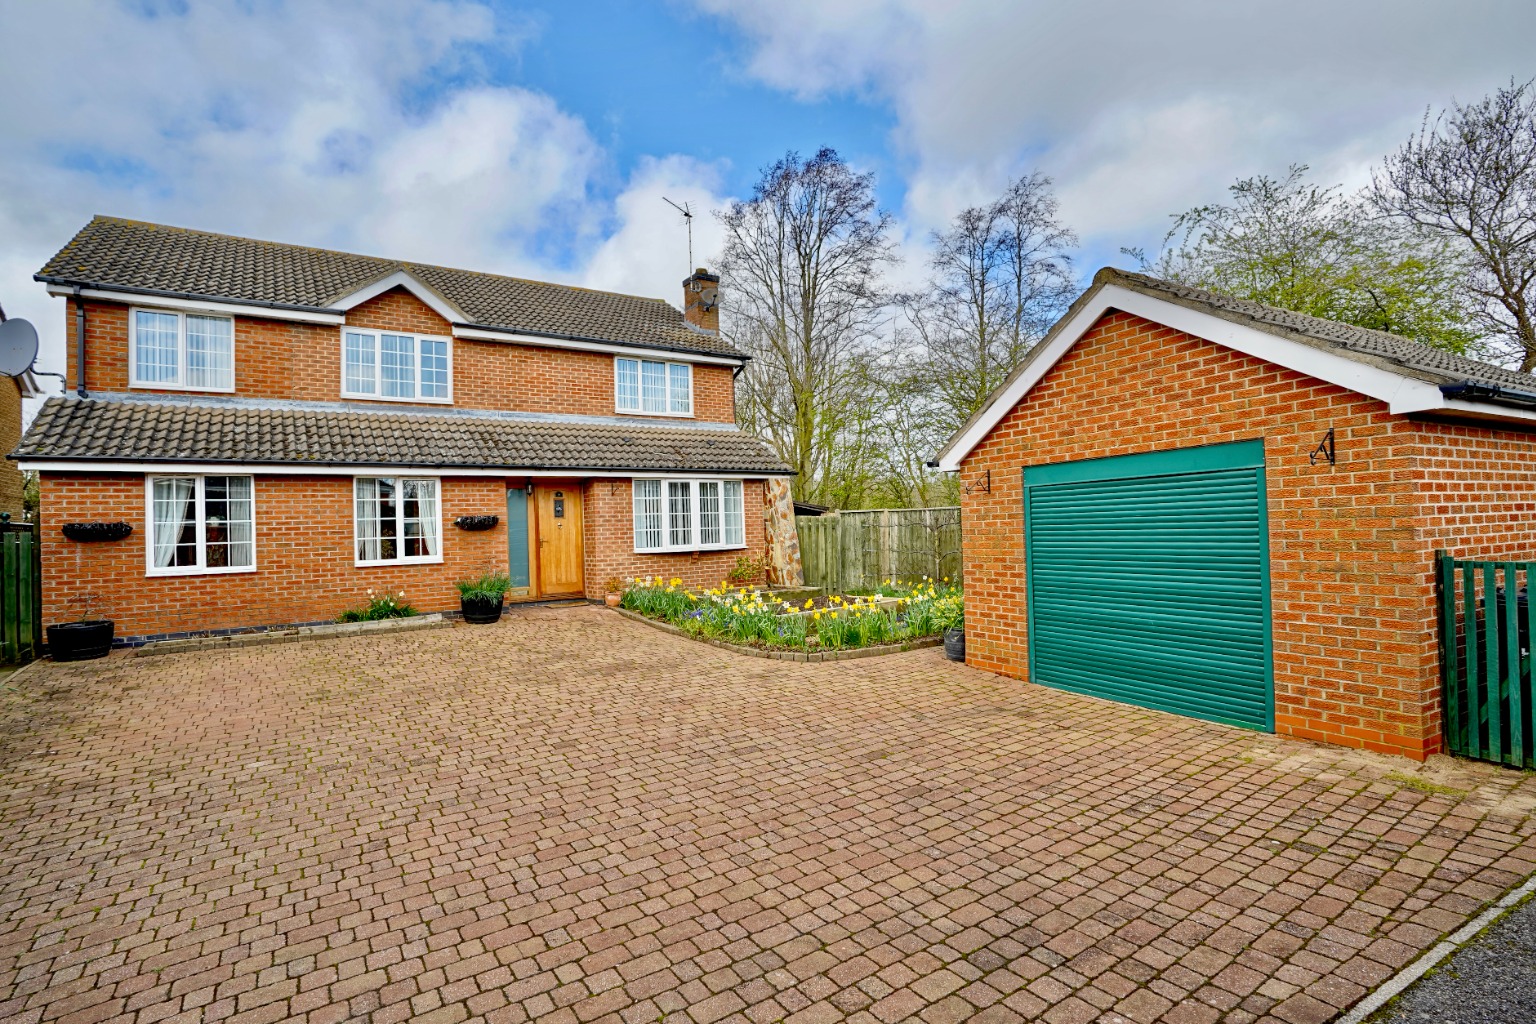 4 bed detached house for sale in Coniston Close, Huntingdon - Property Image 1